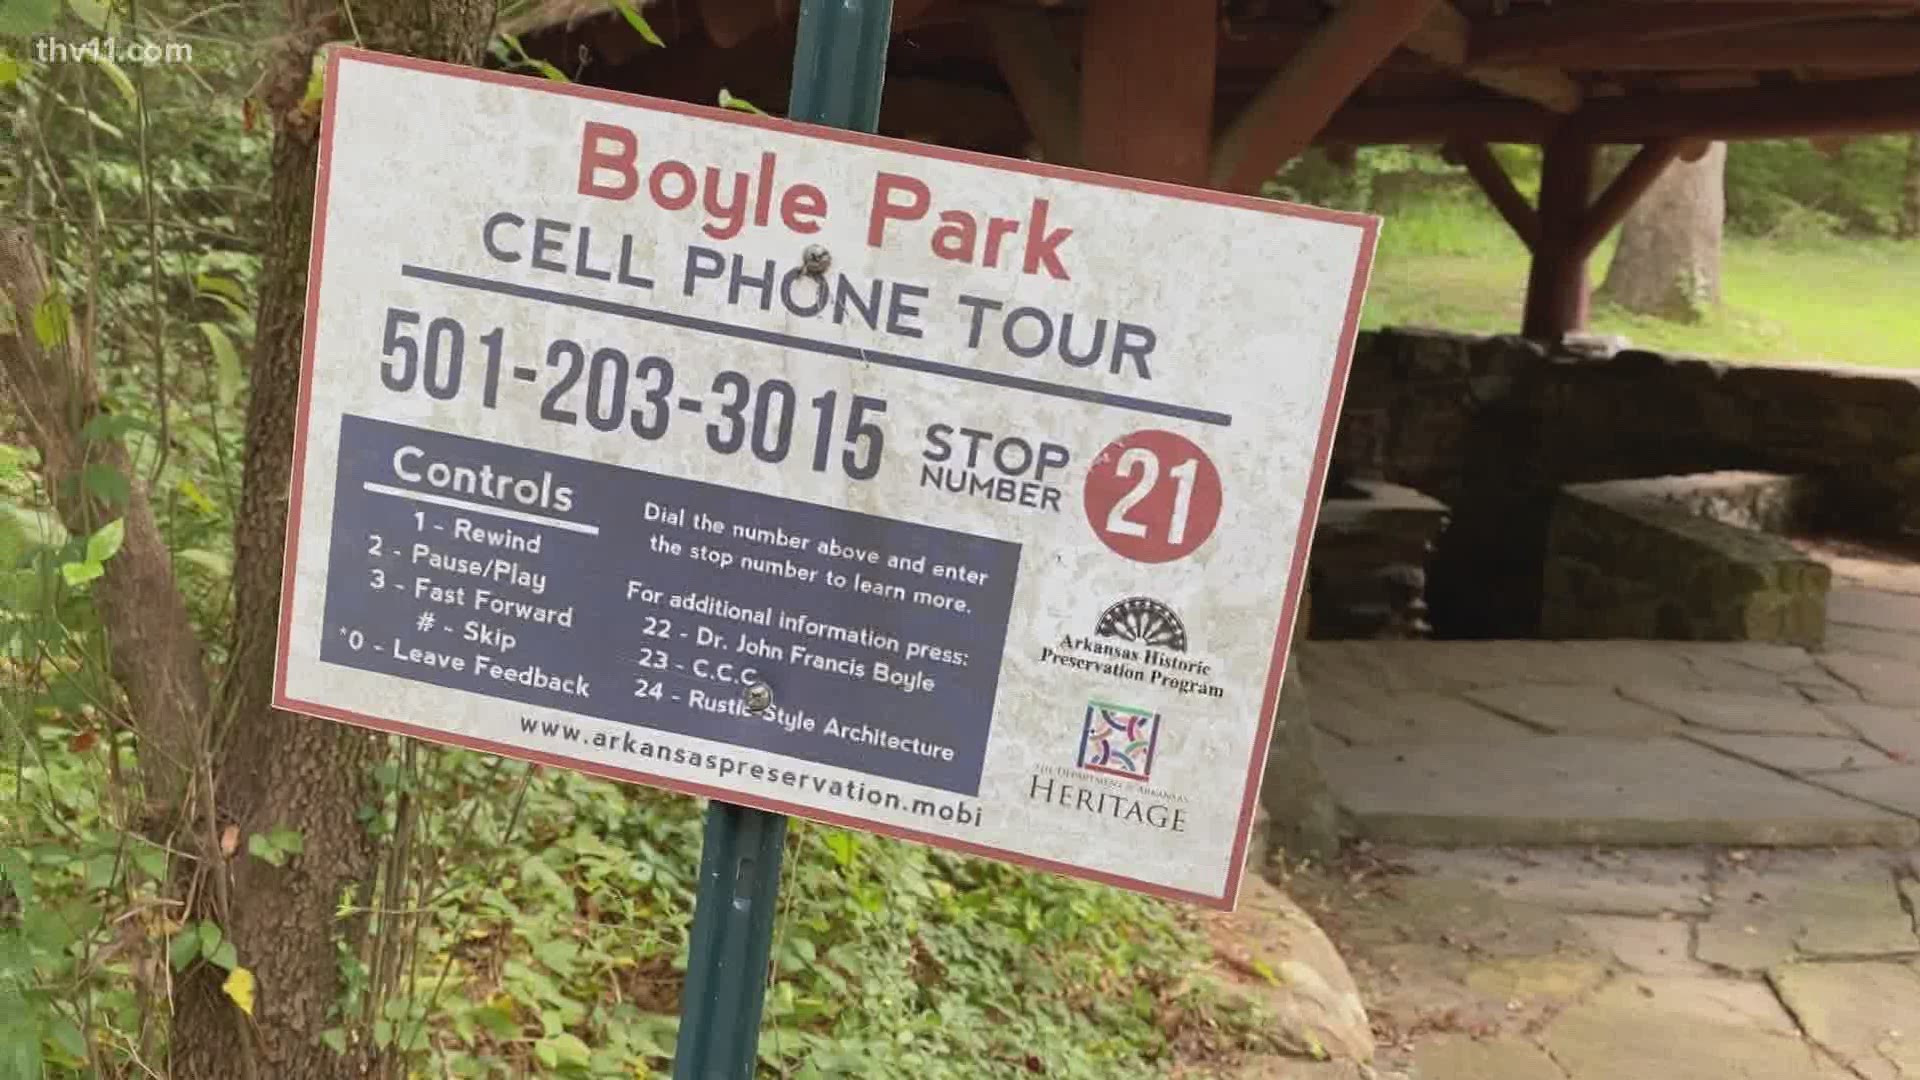 This week for Discover Arkansas, THV11's Ashley King takes us through Boyle Park in Little Rock, all while making sure she still knows how to ride a bike.